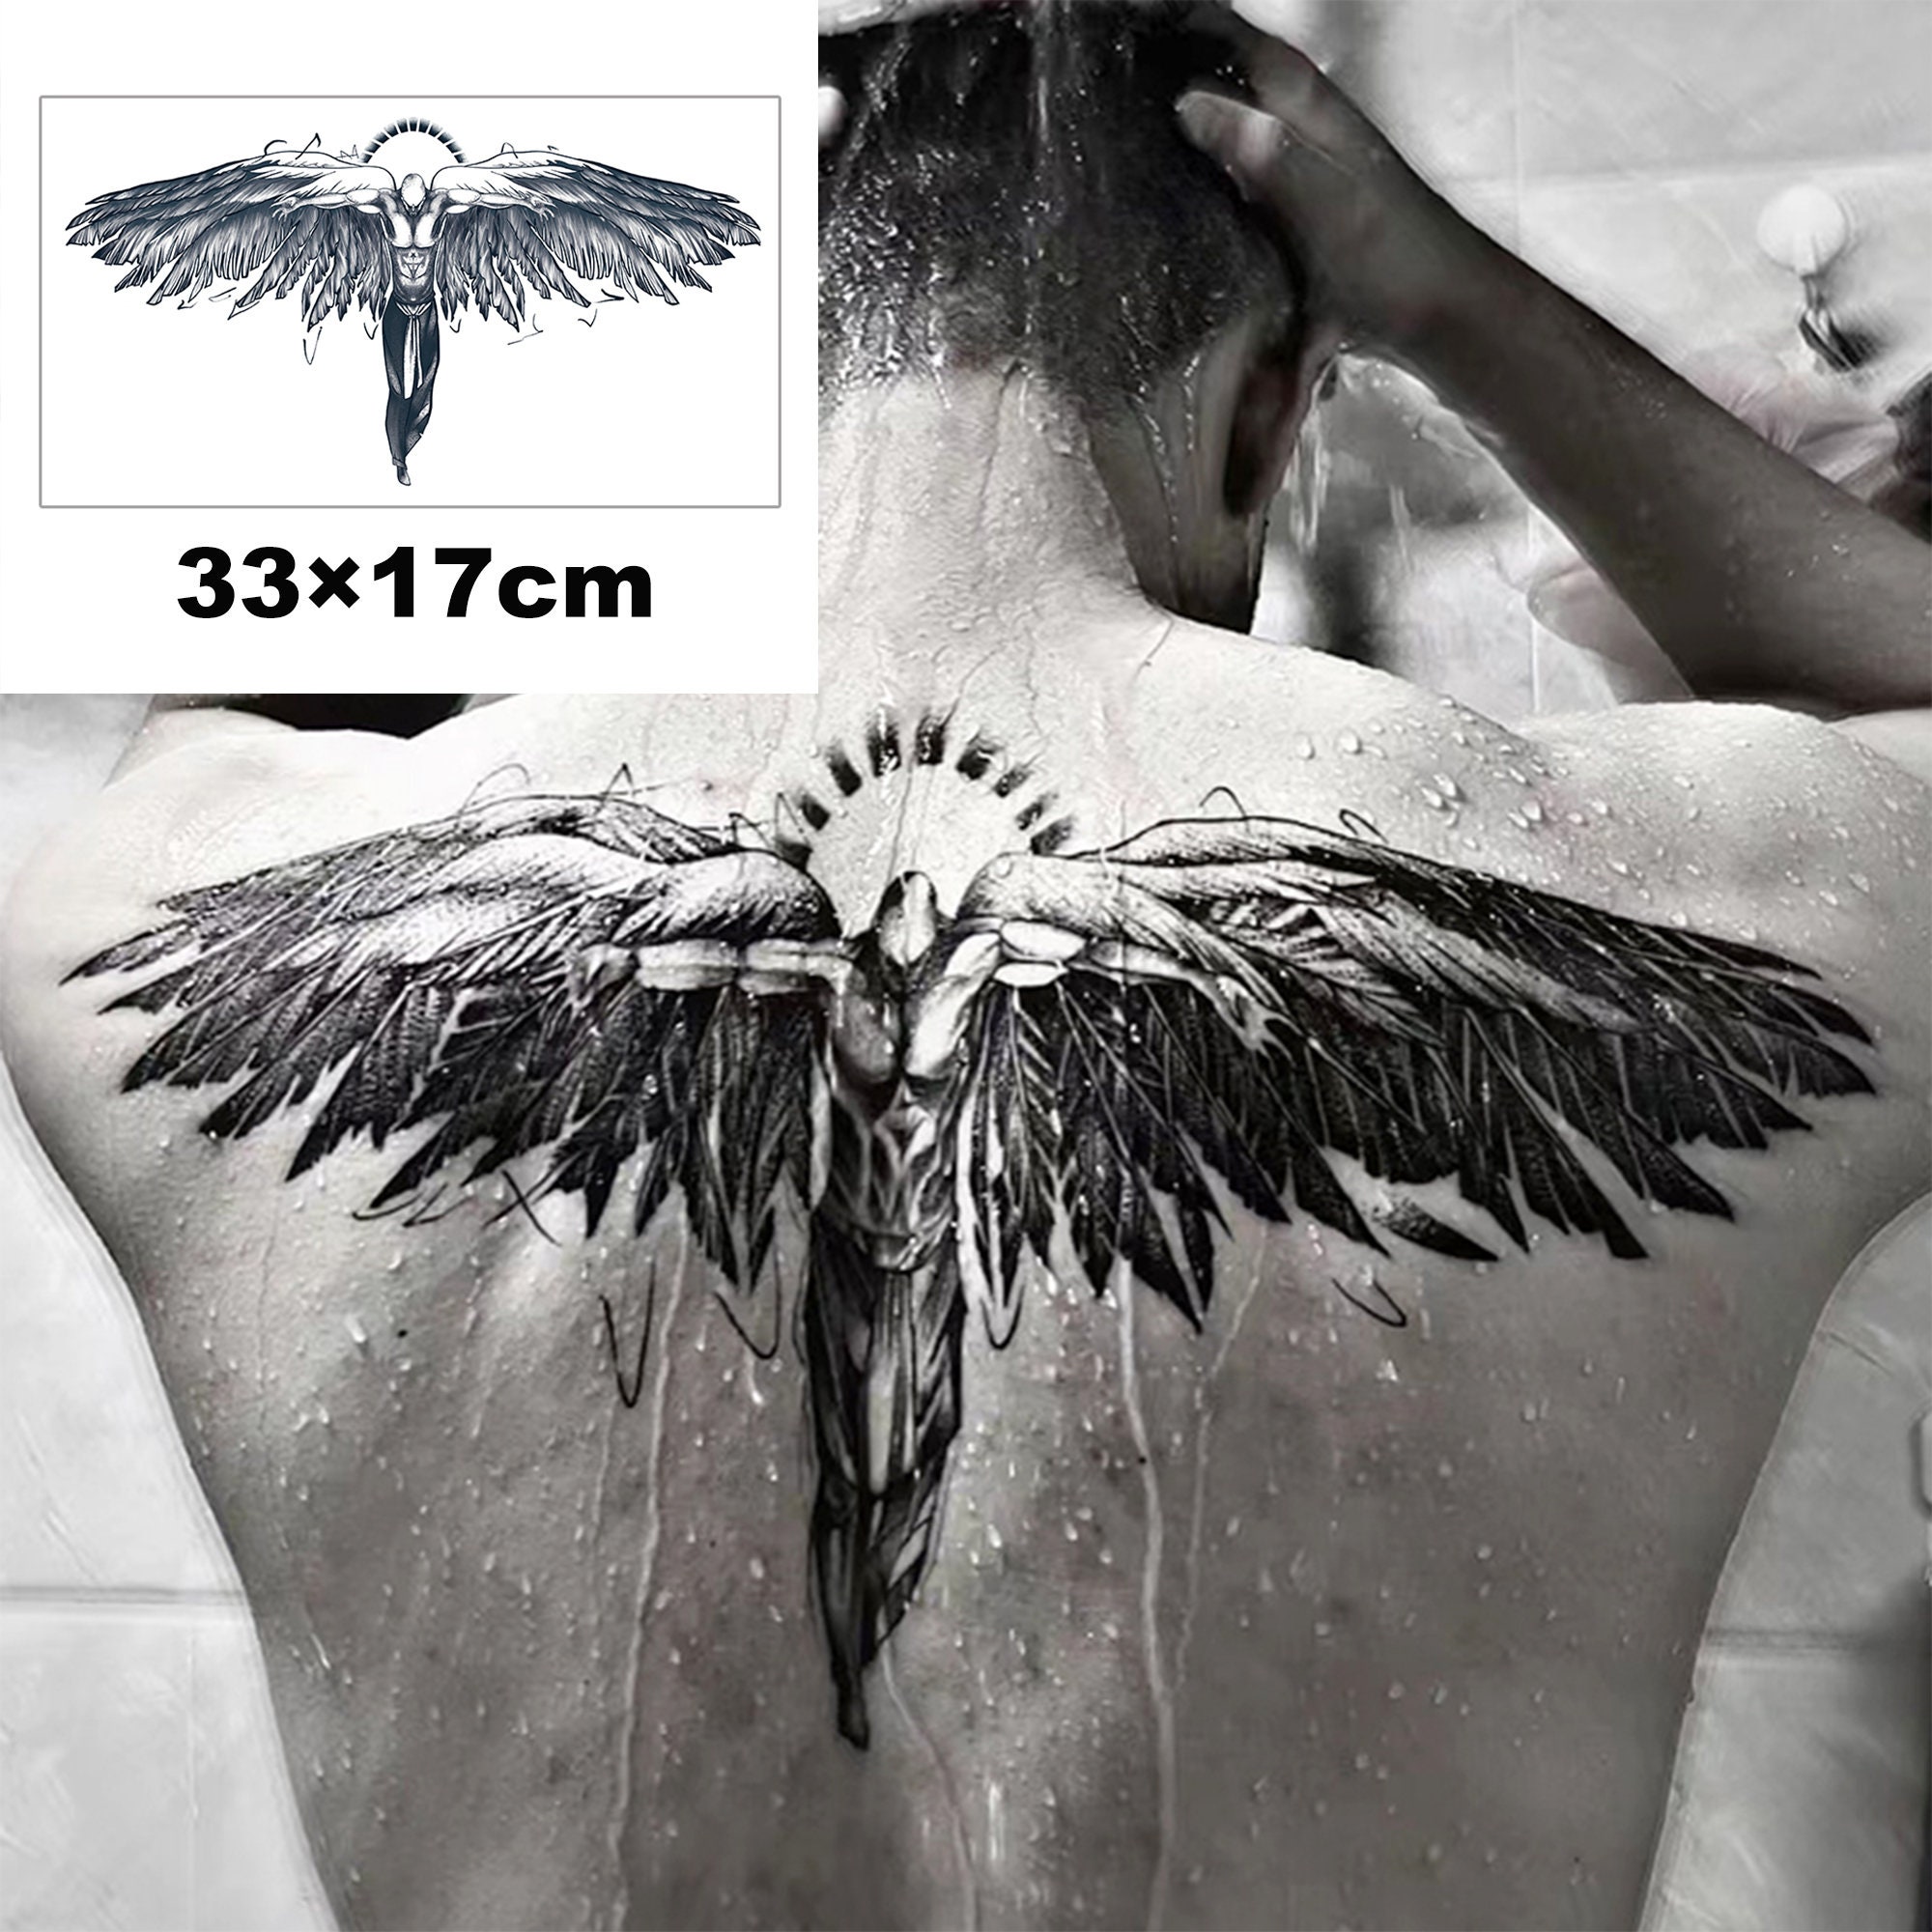 Tattoo uploaded by Skin City Tattoo • Chest piece done by Danny McGee Rose # chesttattoo #wings #hearttattoo #blackandwhite #wingstattoo • Tattoodo